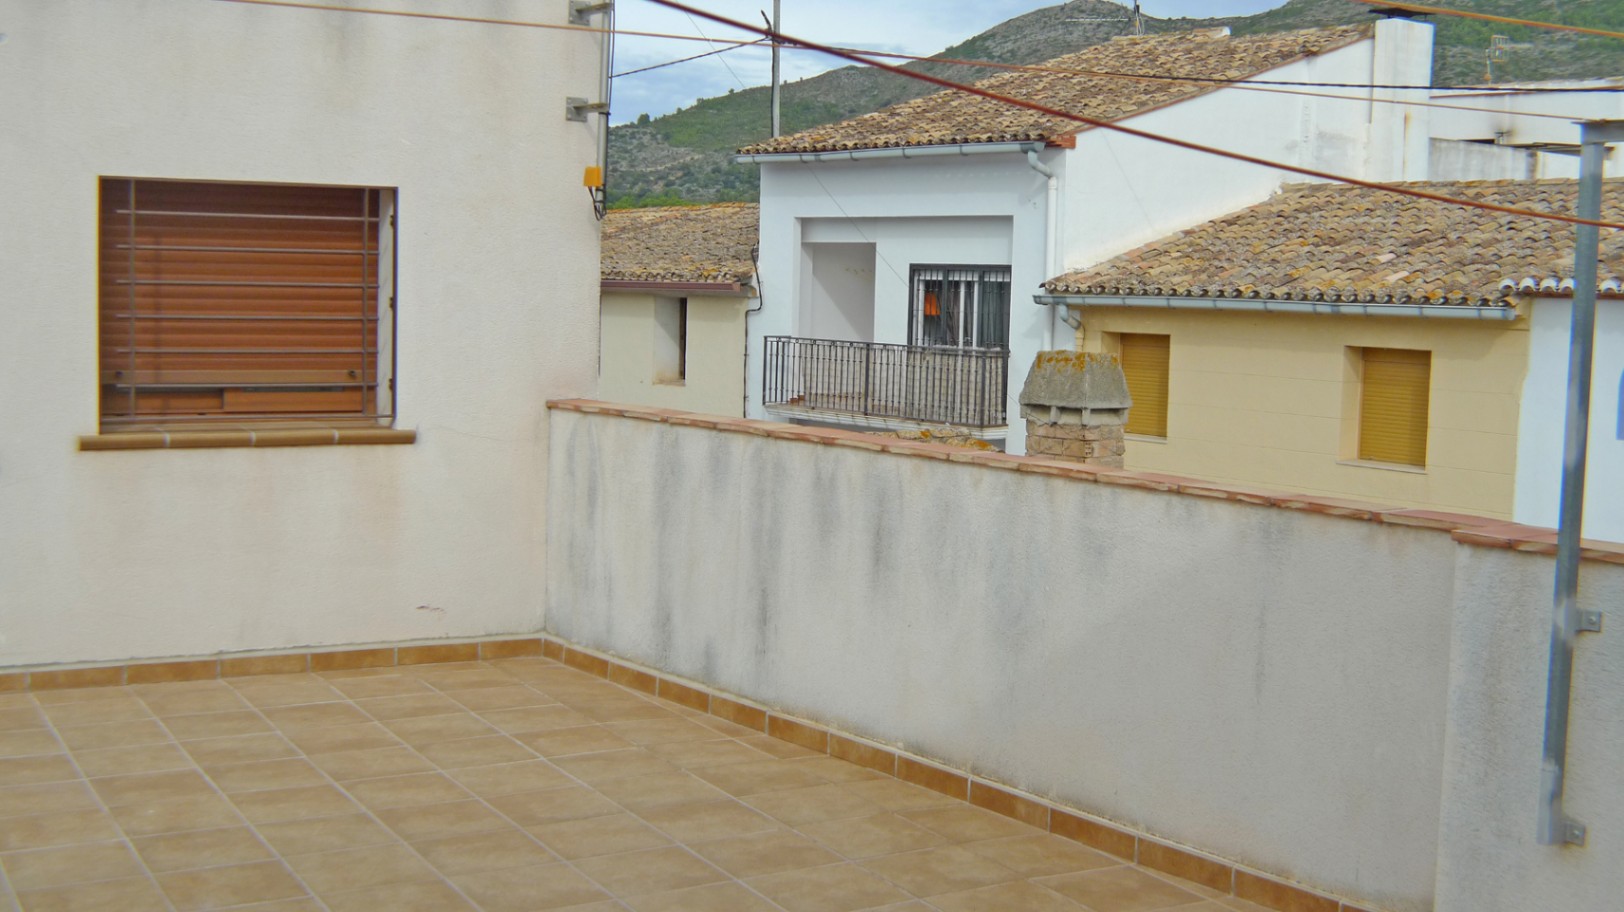 For Sale. Townhouse in Jalon Valley